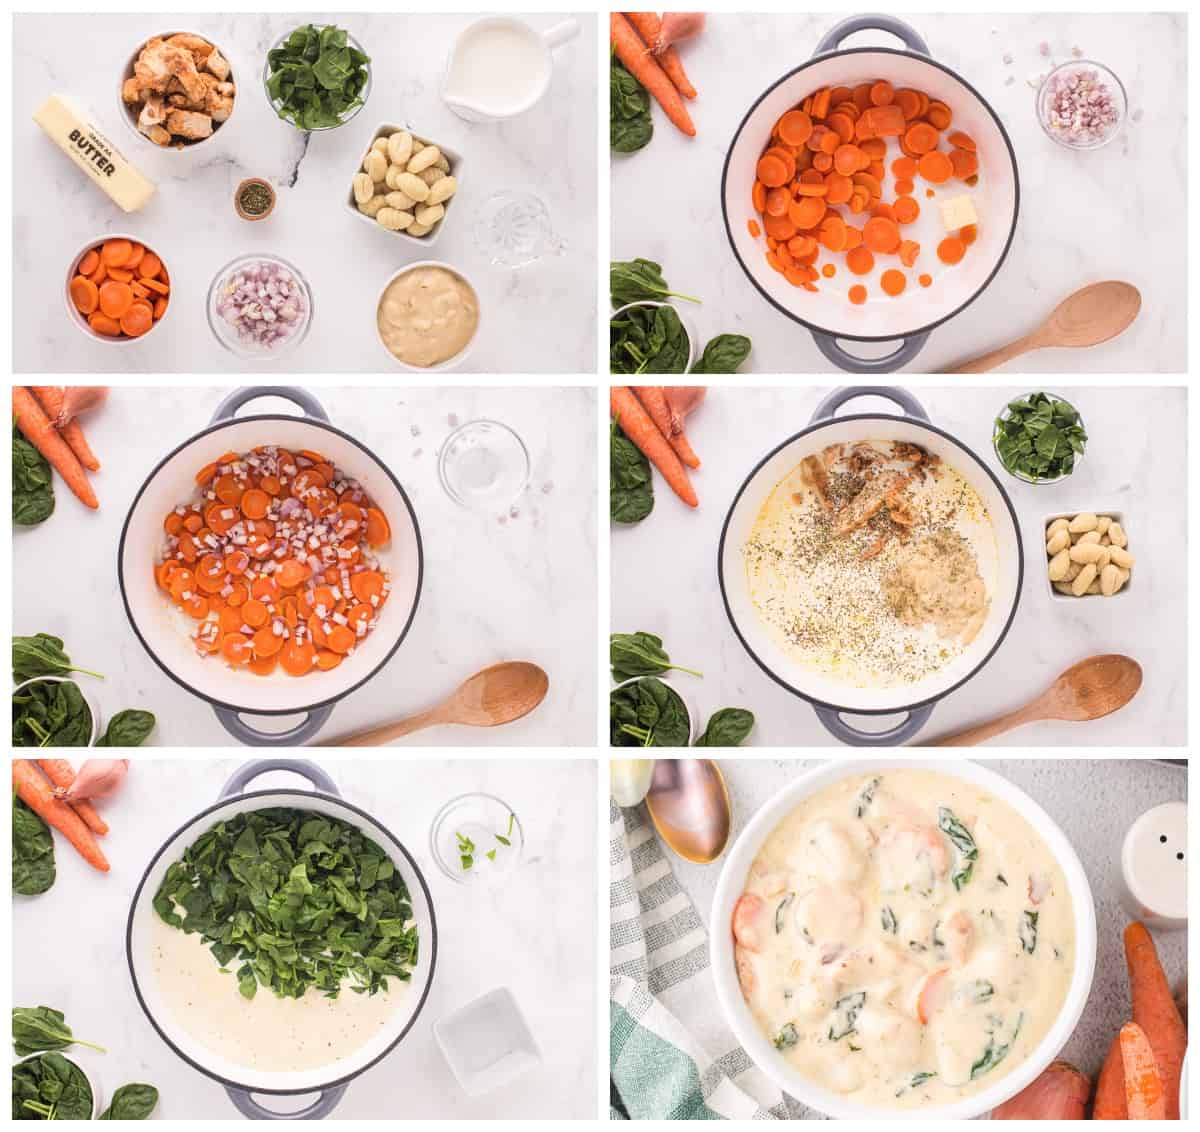 how to make chicken gnocchi soup step by step photo instructions